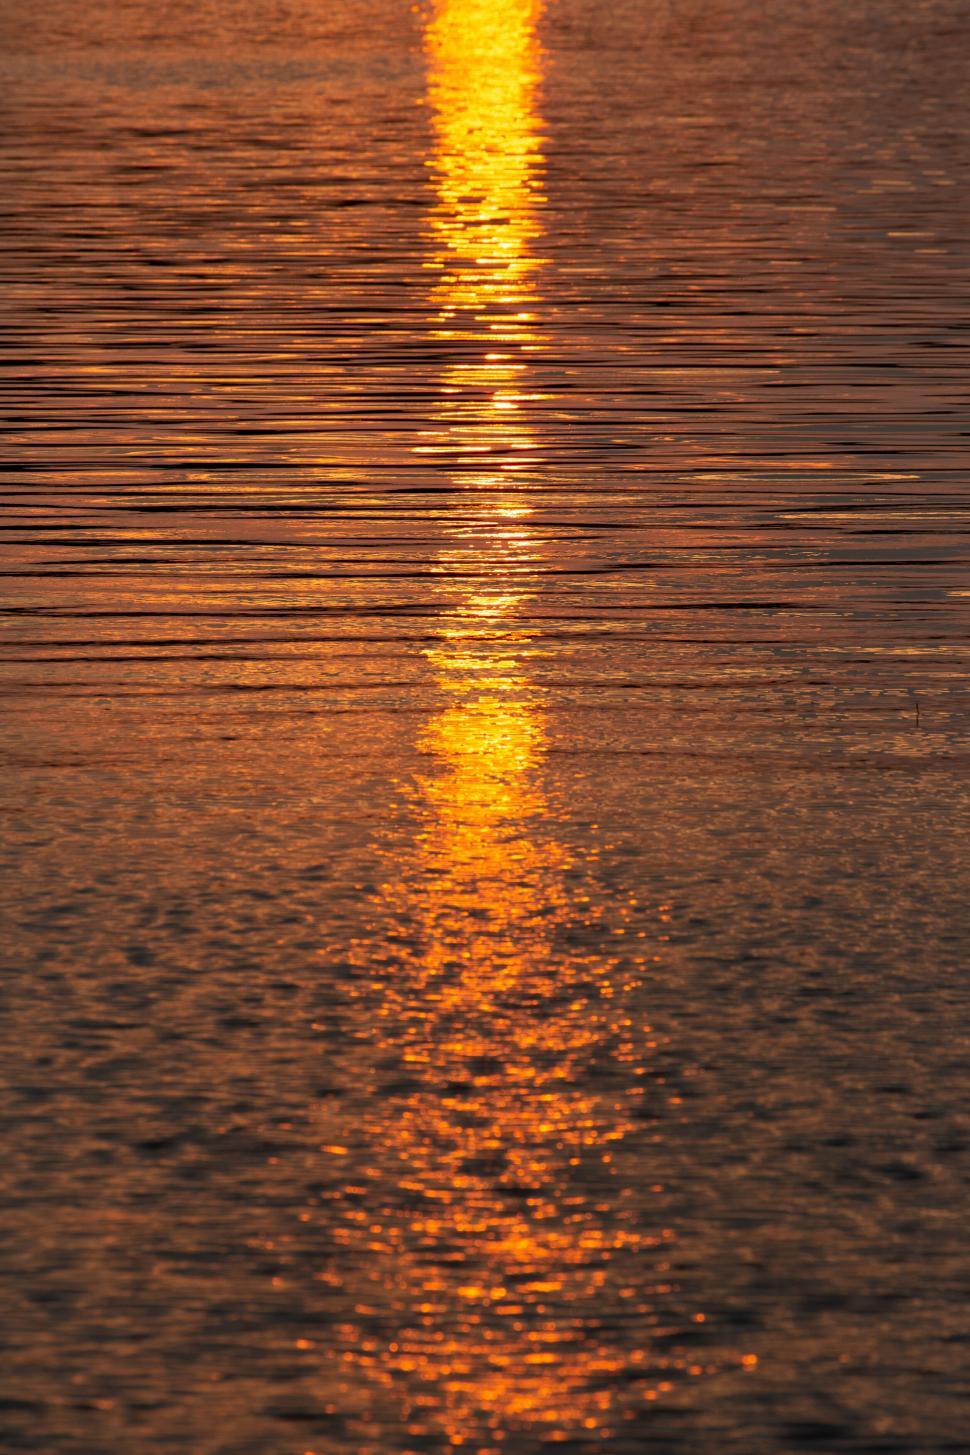 Free Image of Golden Reflection on Calm Water 